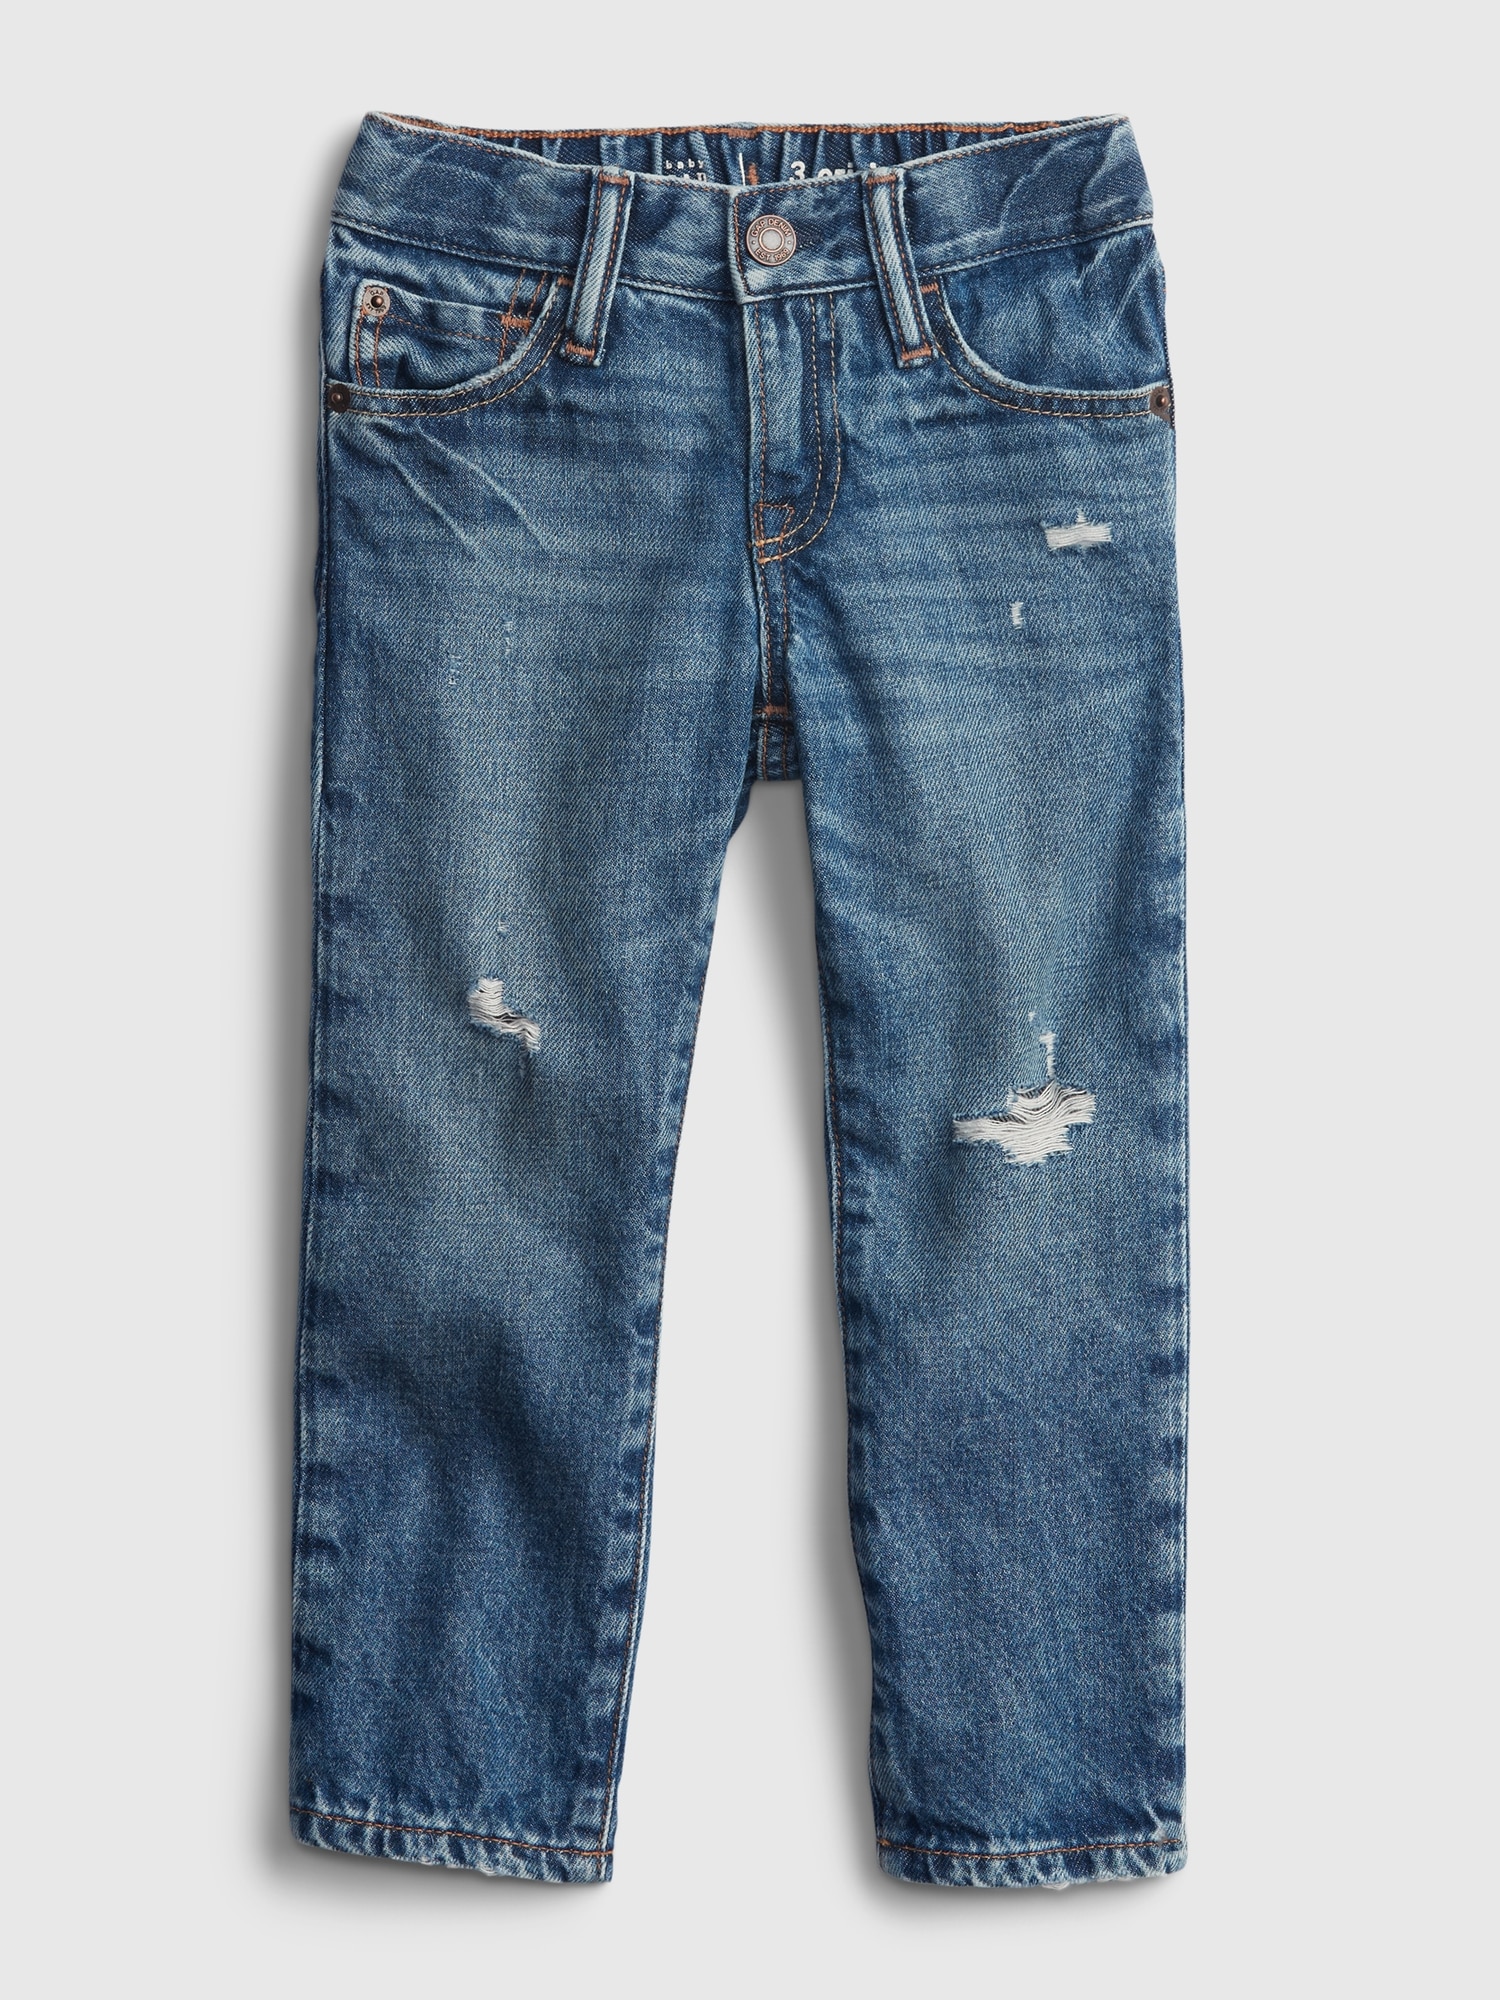 Gap Toddler Original Fit Jeans with Washwell blue. 1